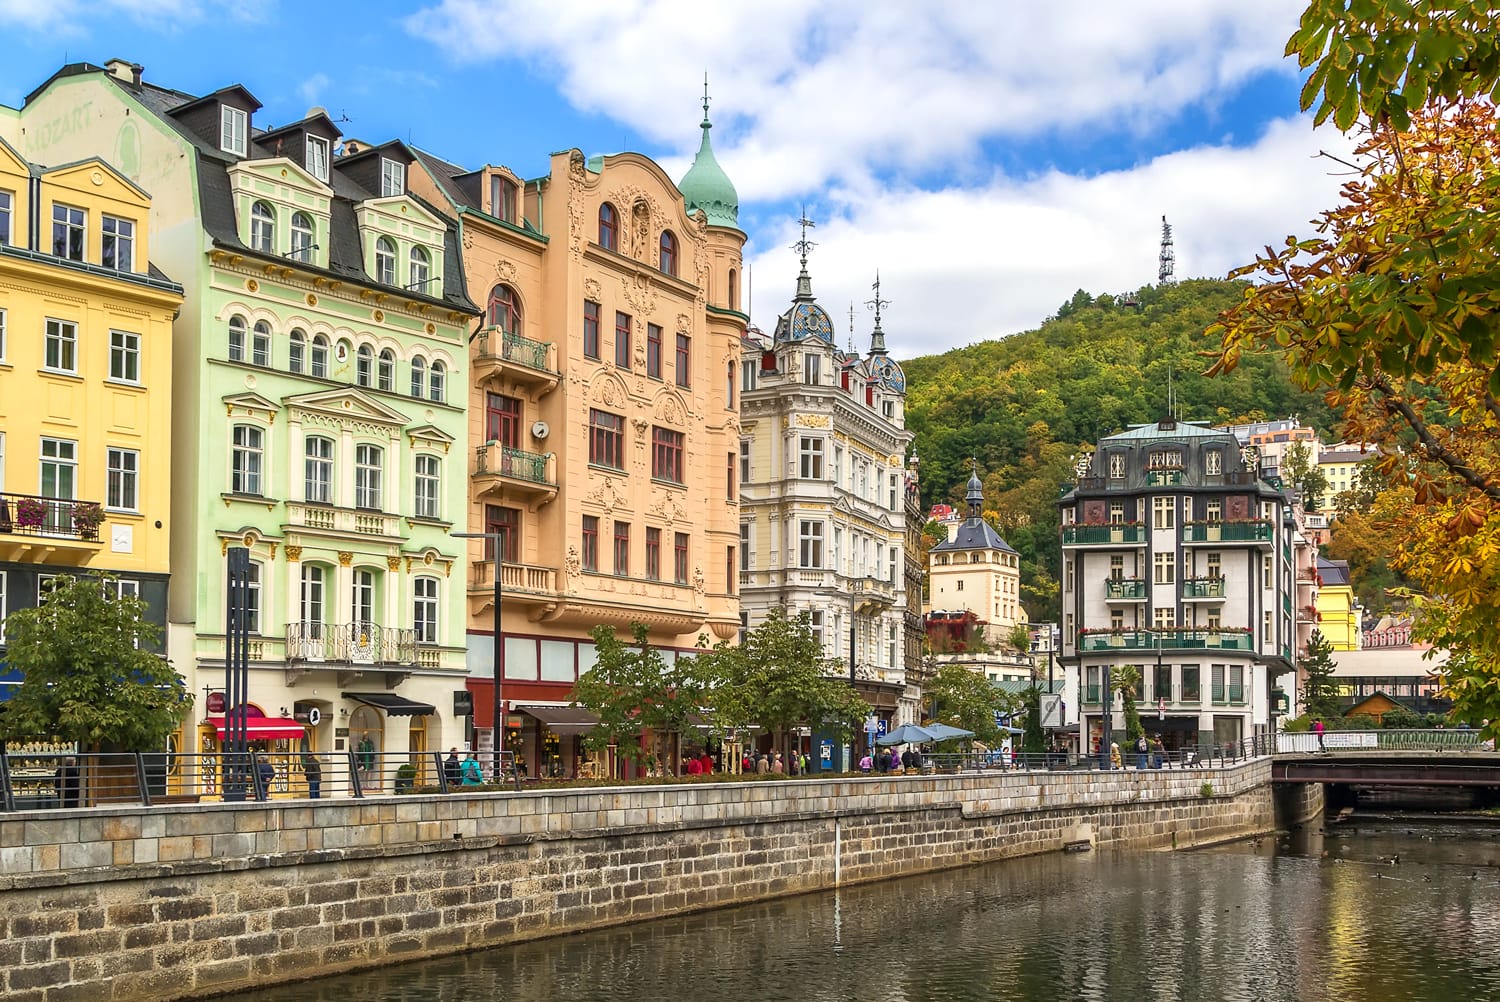 Embankment of Tepla river in the center of Karlovy Vary, Czech republic